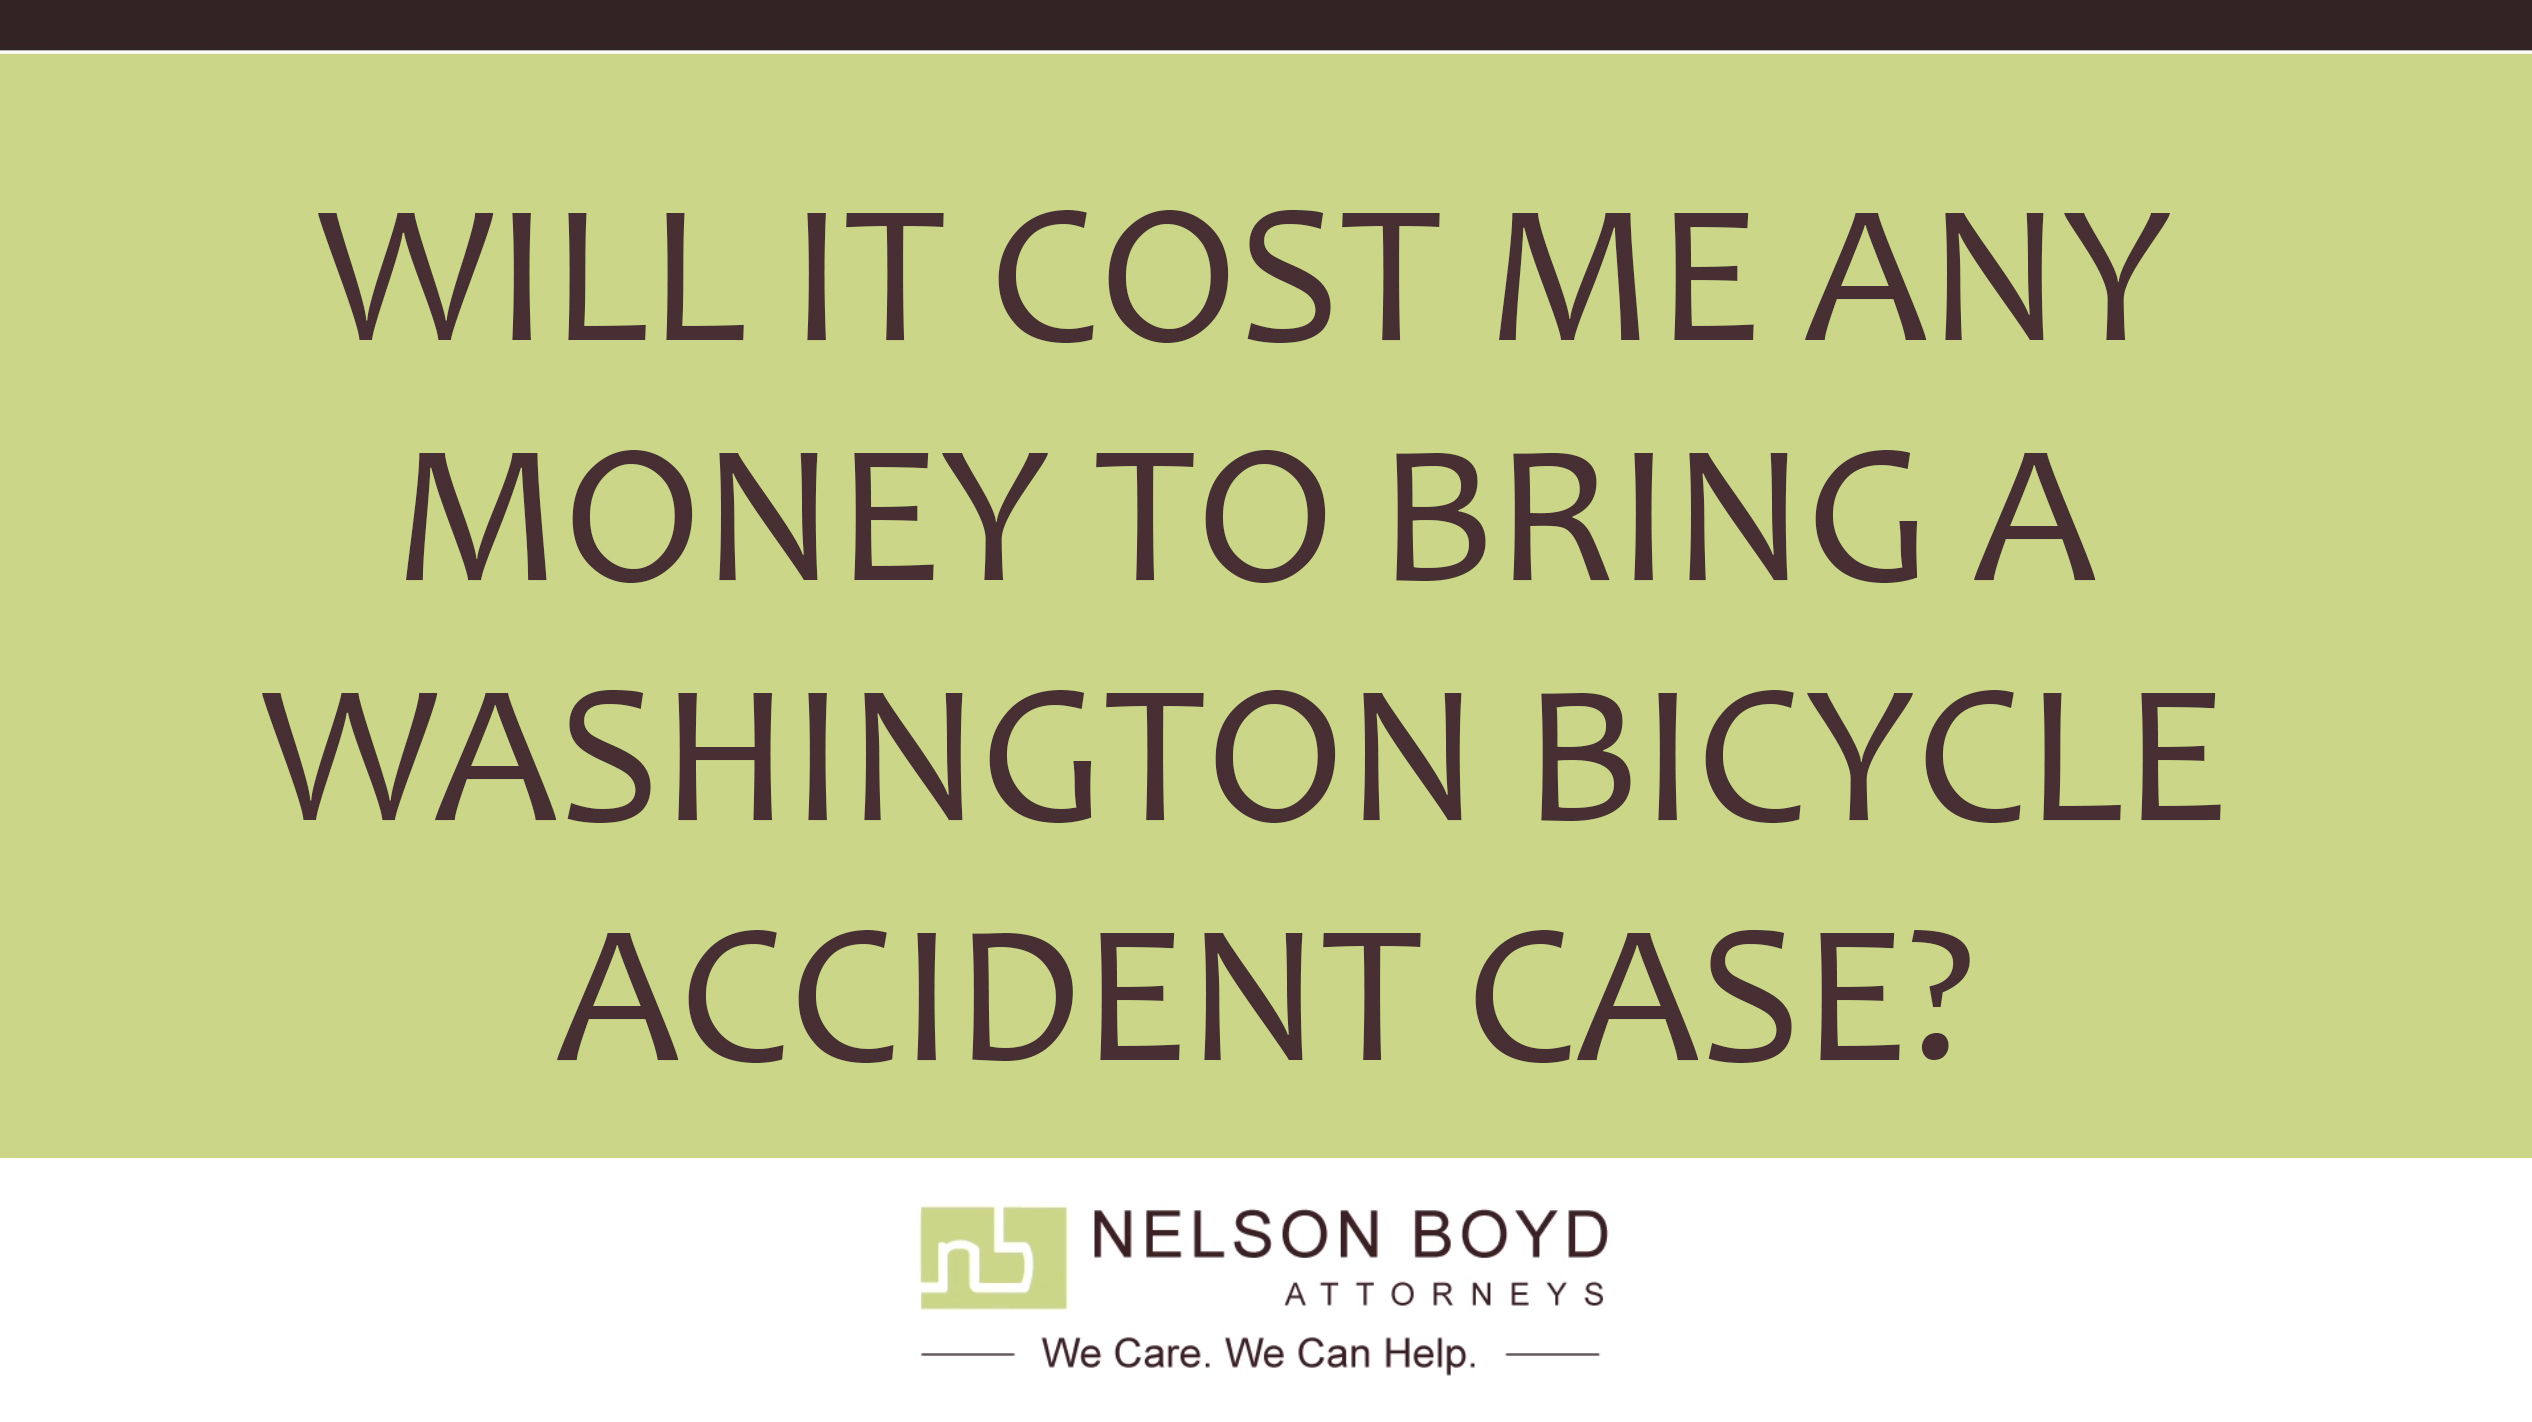 WILL IT COST ME ANY MONEY TO BRING A WASHINGTON BICYCLE ACCIDENT CASE??